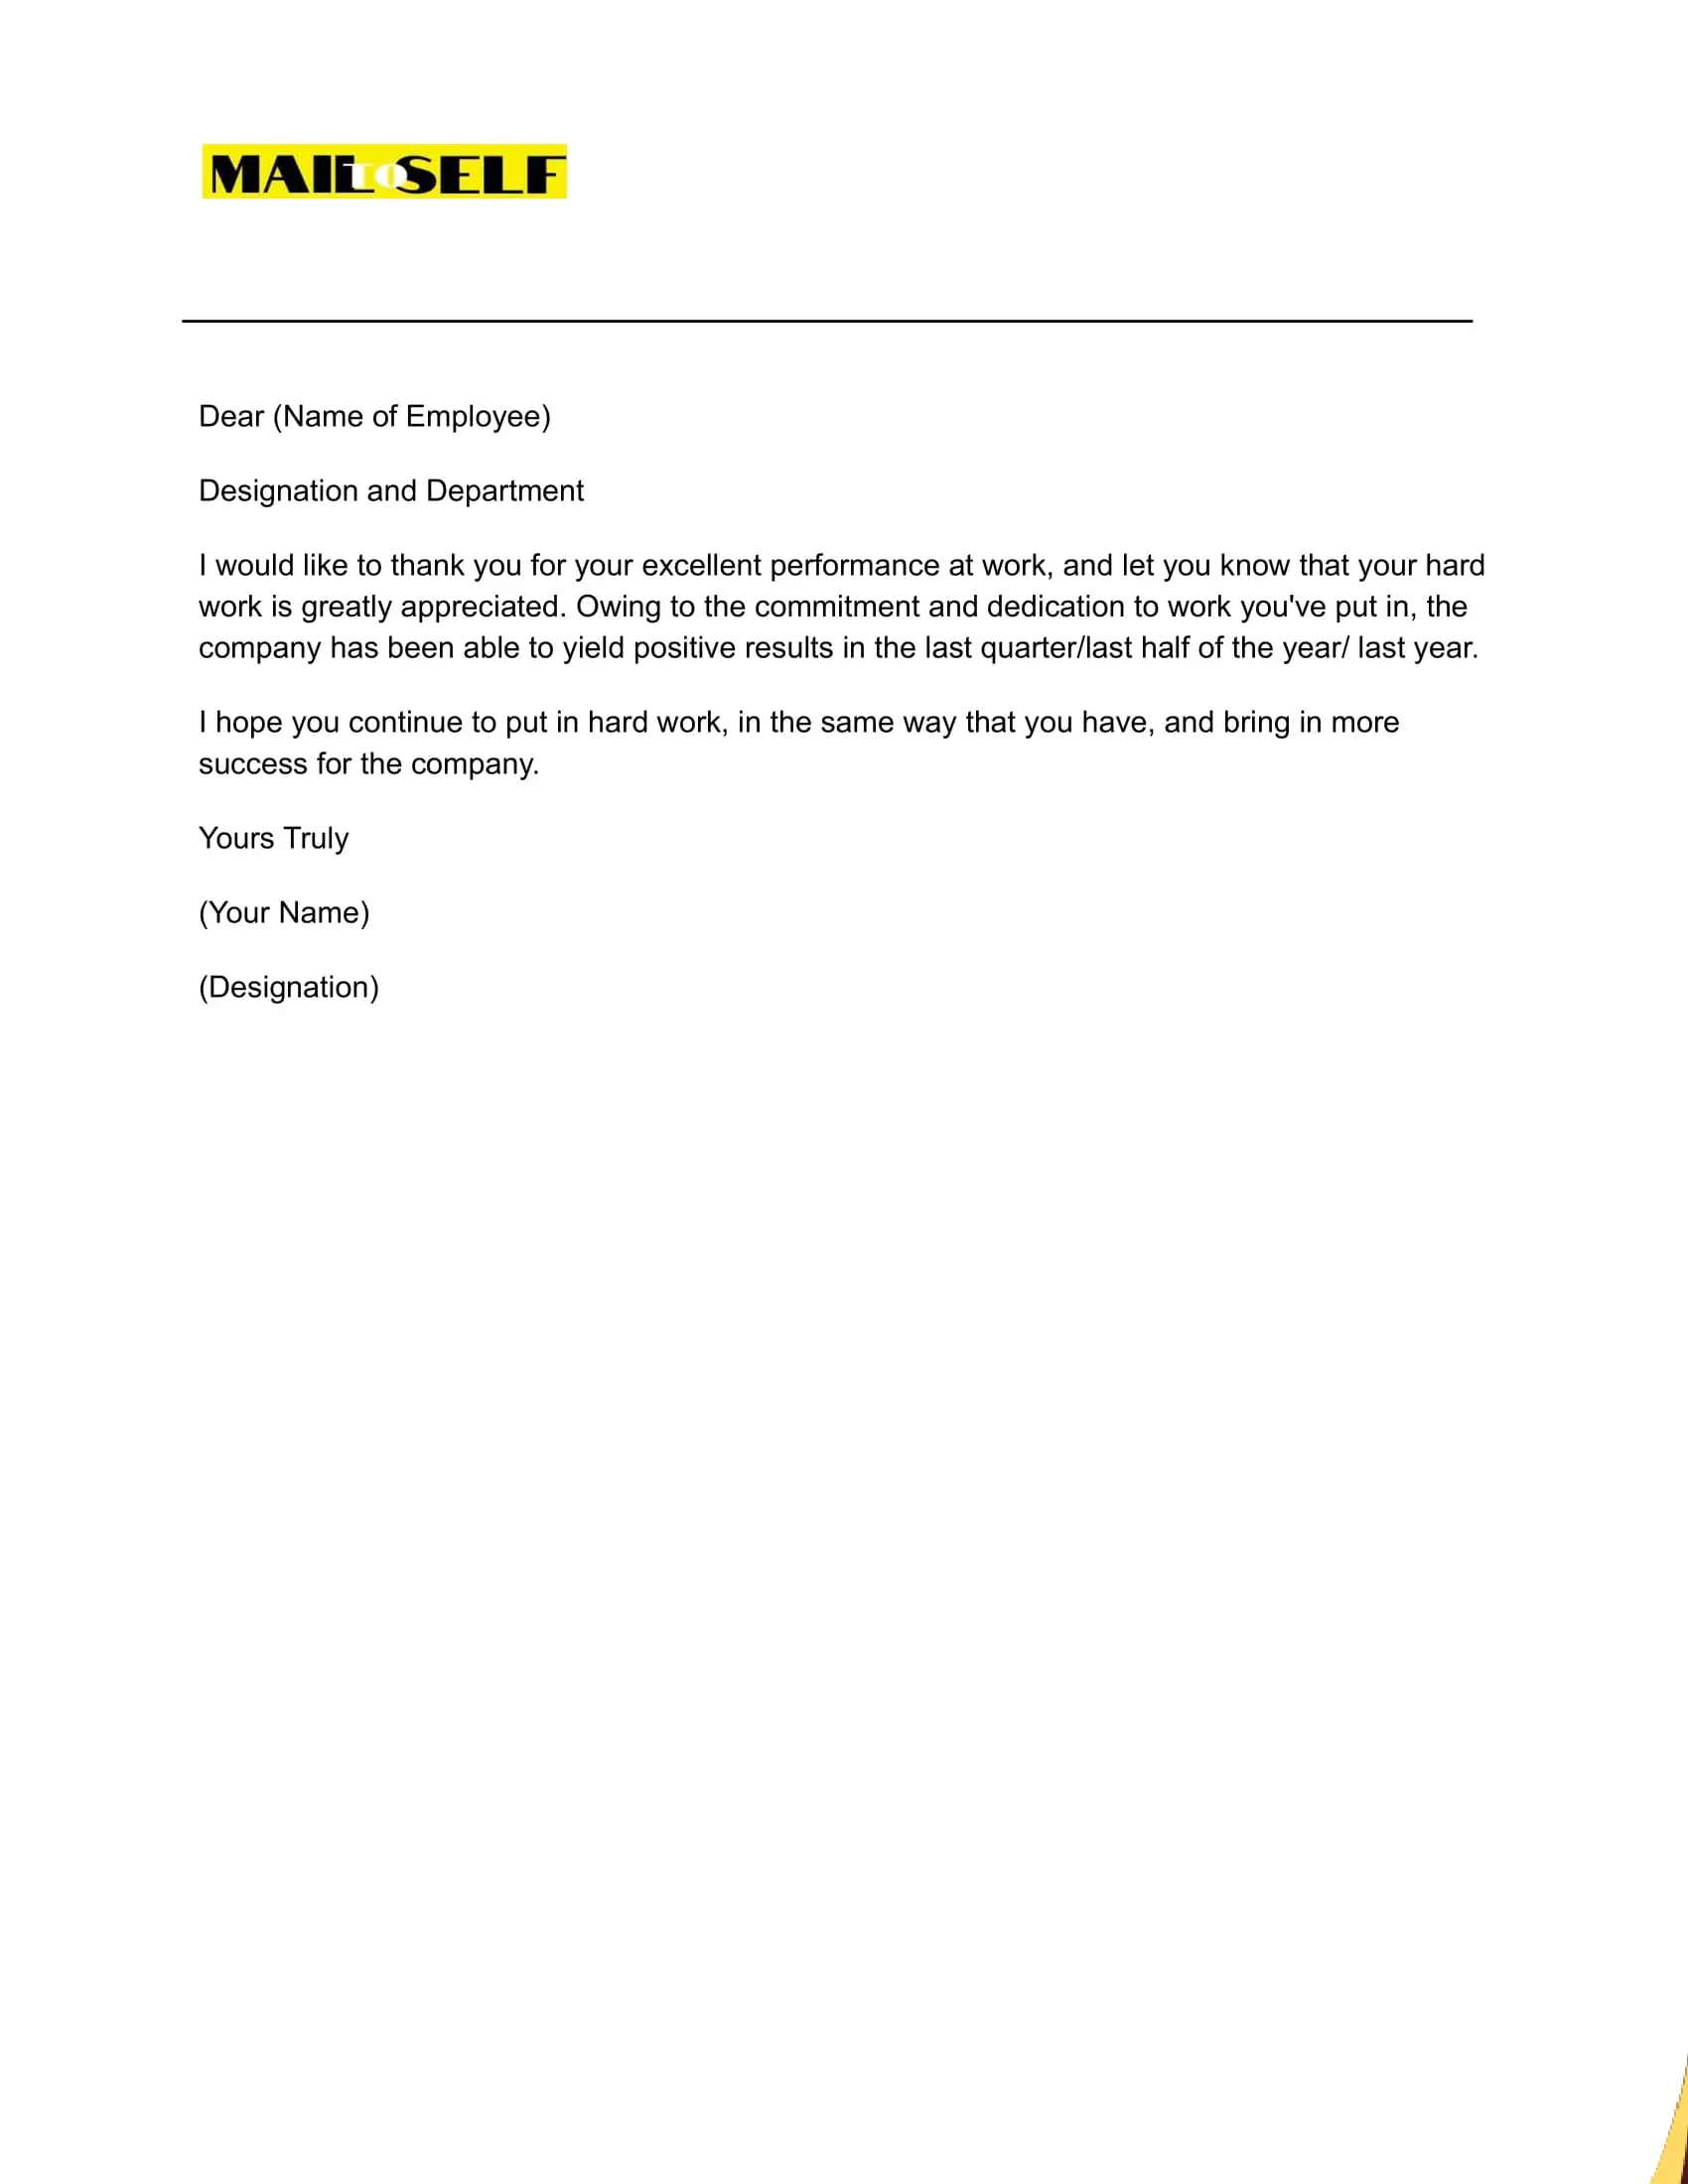 Sample #1 Thank You Letter to Employees for Excellent Performance